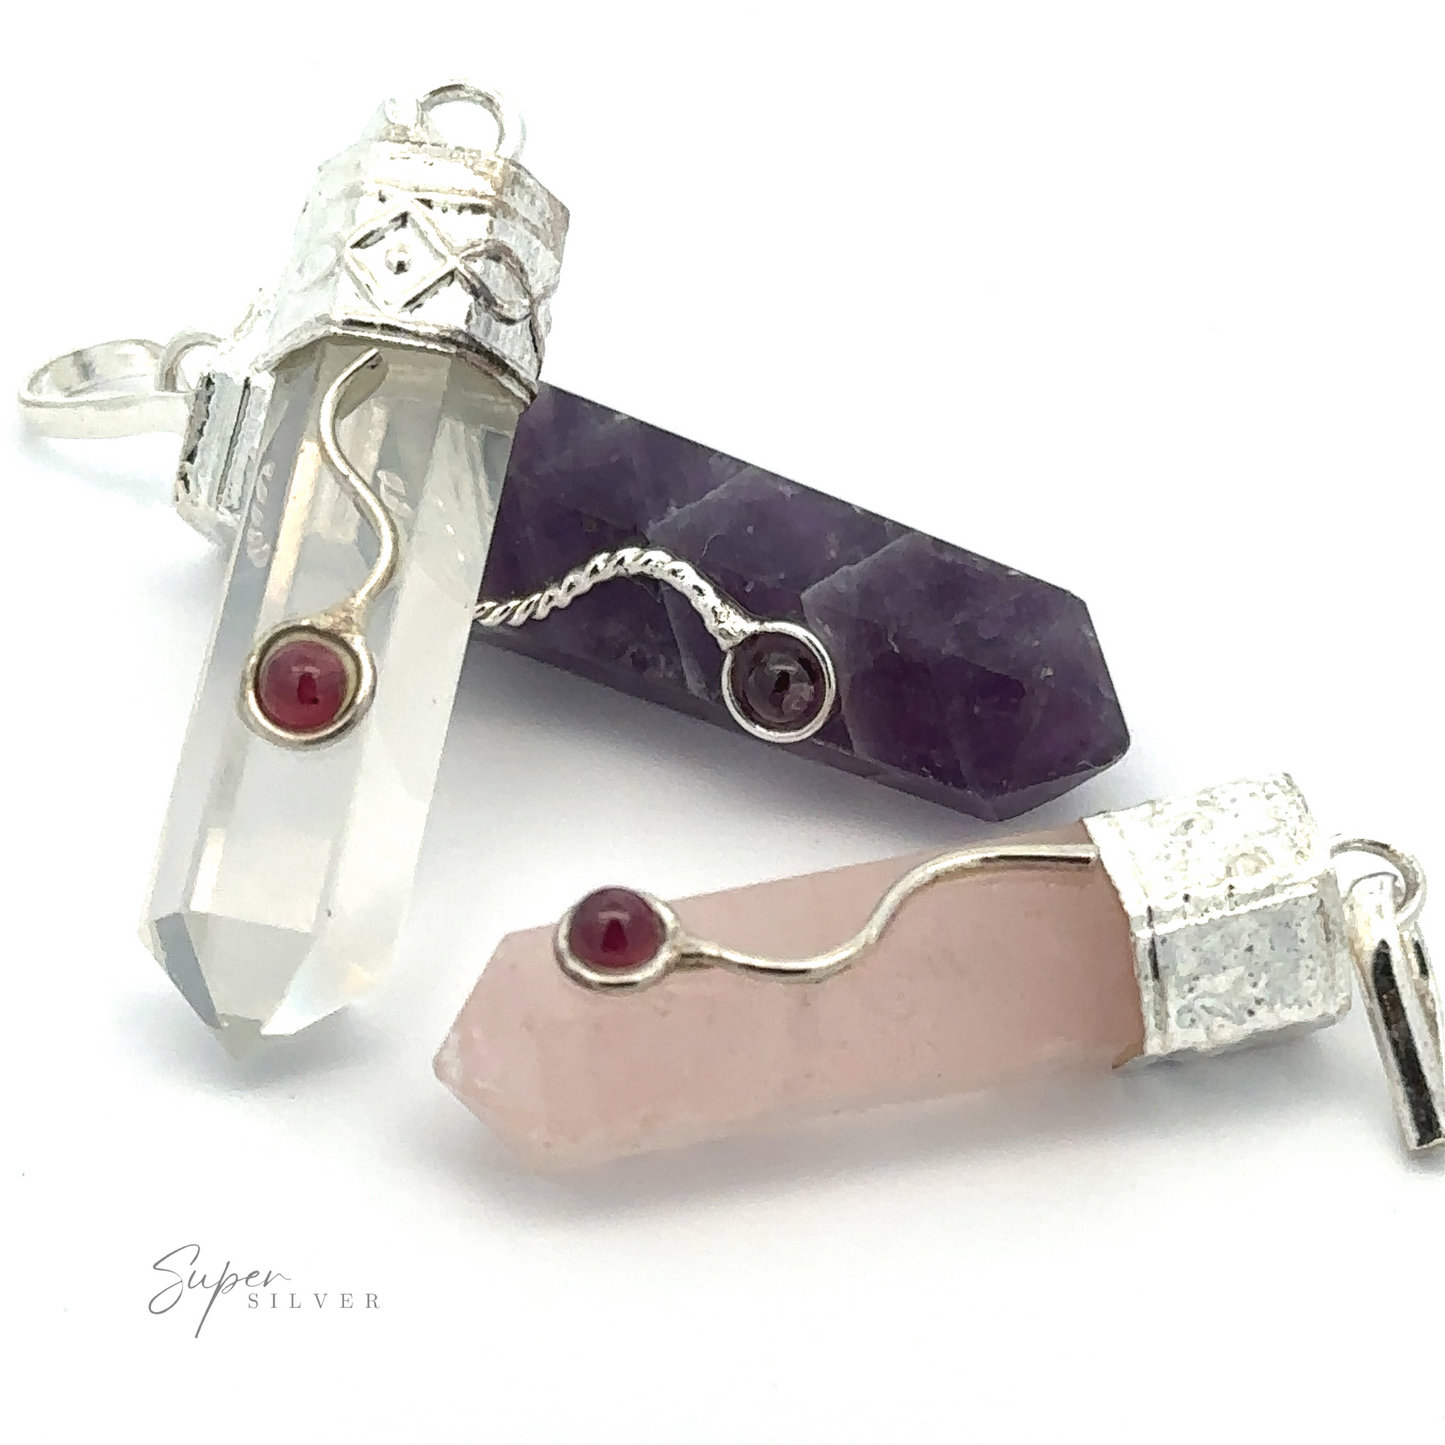 Three Crystal Pendants with Decorative Bail are displayed: one clear, one purple, and one Rose Quartz pink, each with a small red garnet detail embedded in the cap's design.